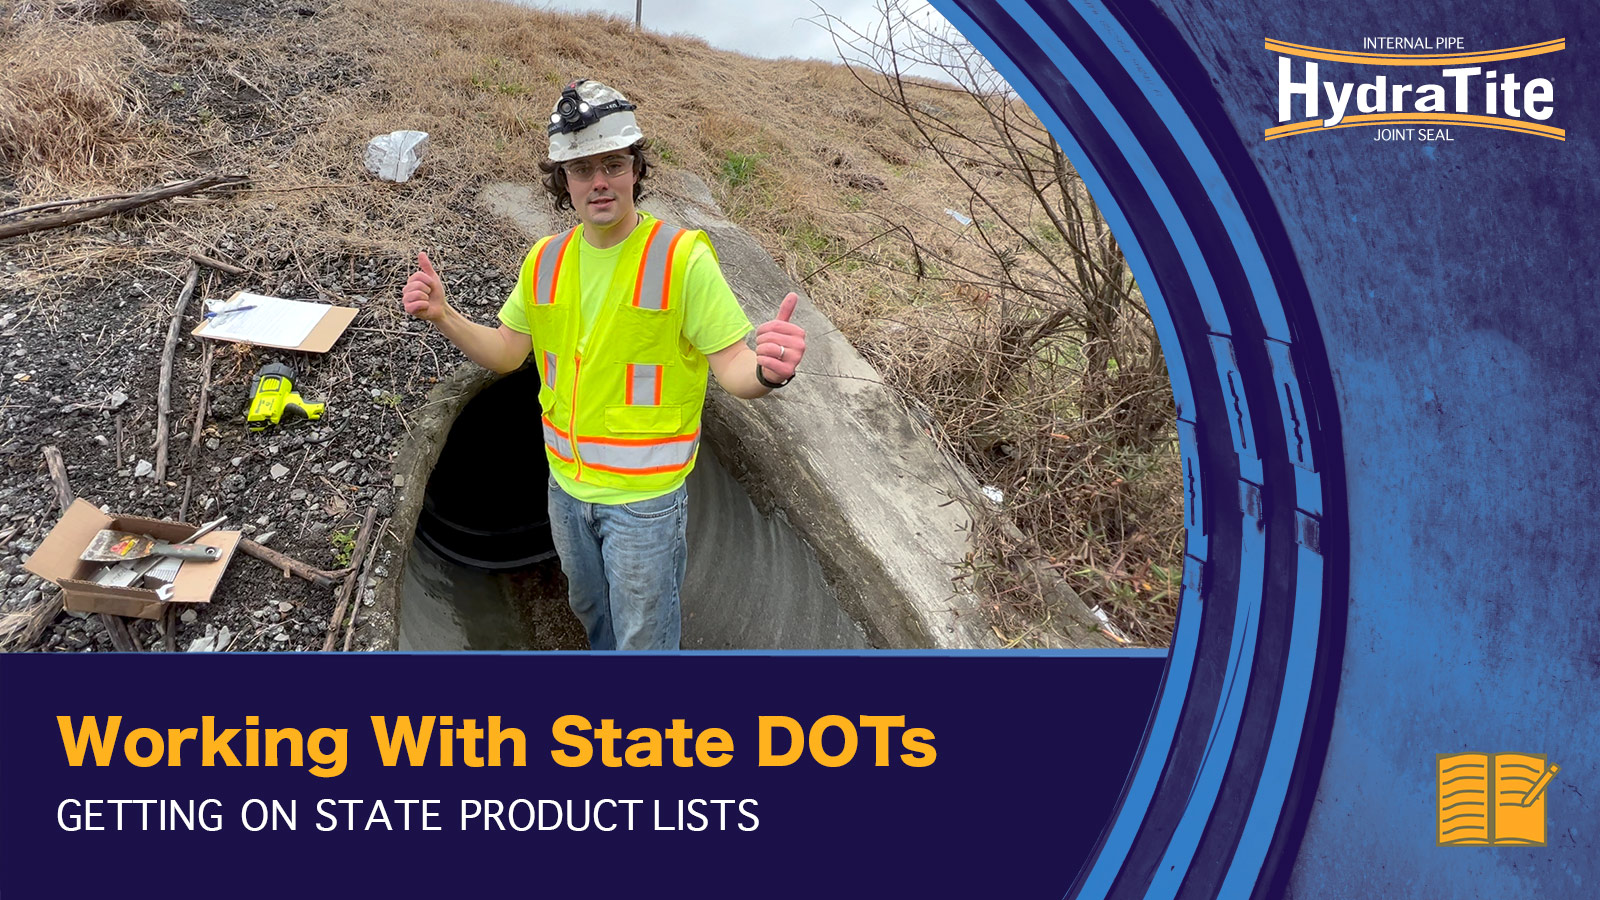 Teaser Image of a technician in front of a culvert where a HydraTite seal was just installed over a joint, "Working With State DOTs, Getting On State Product Lists"